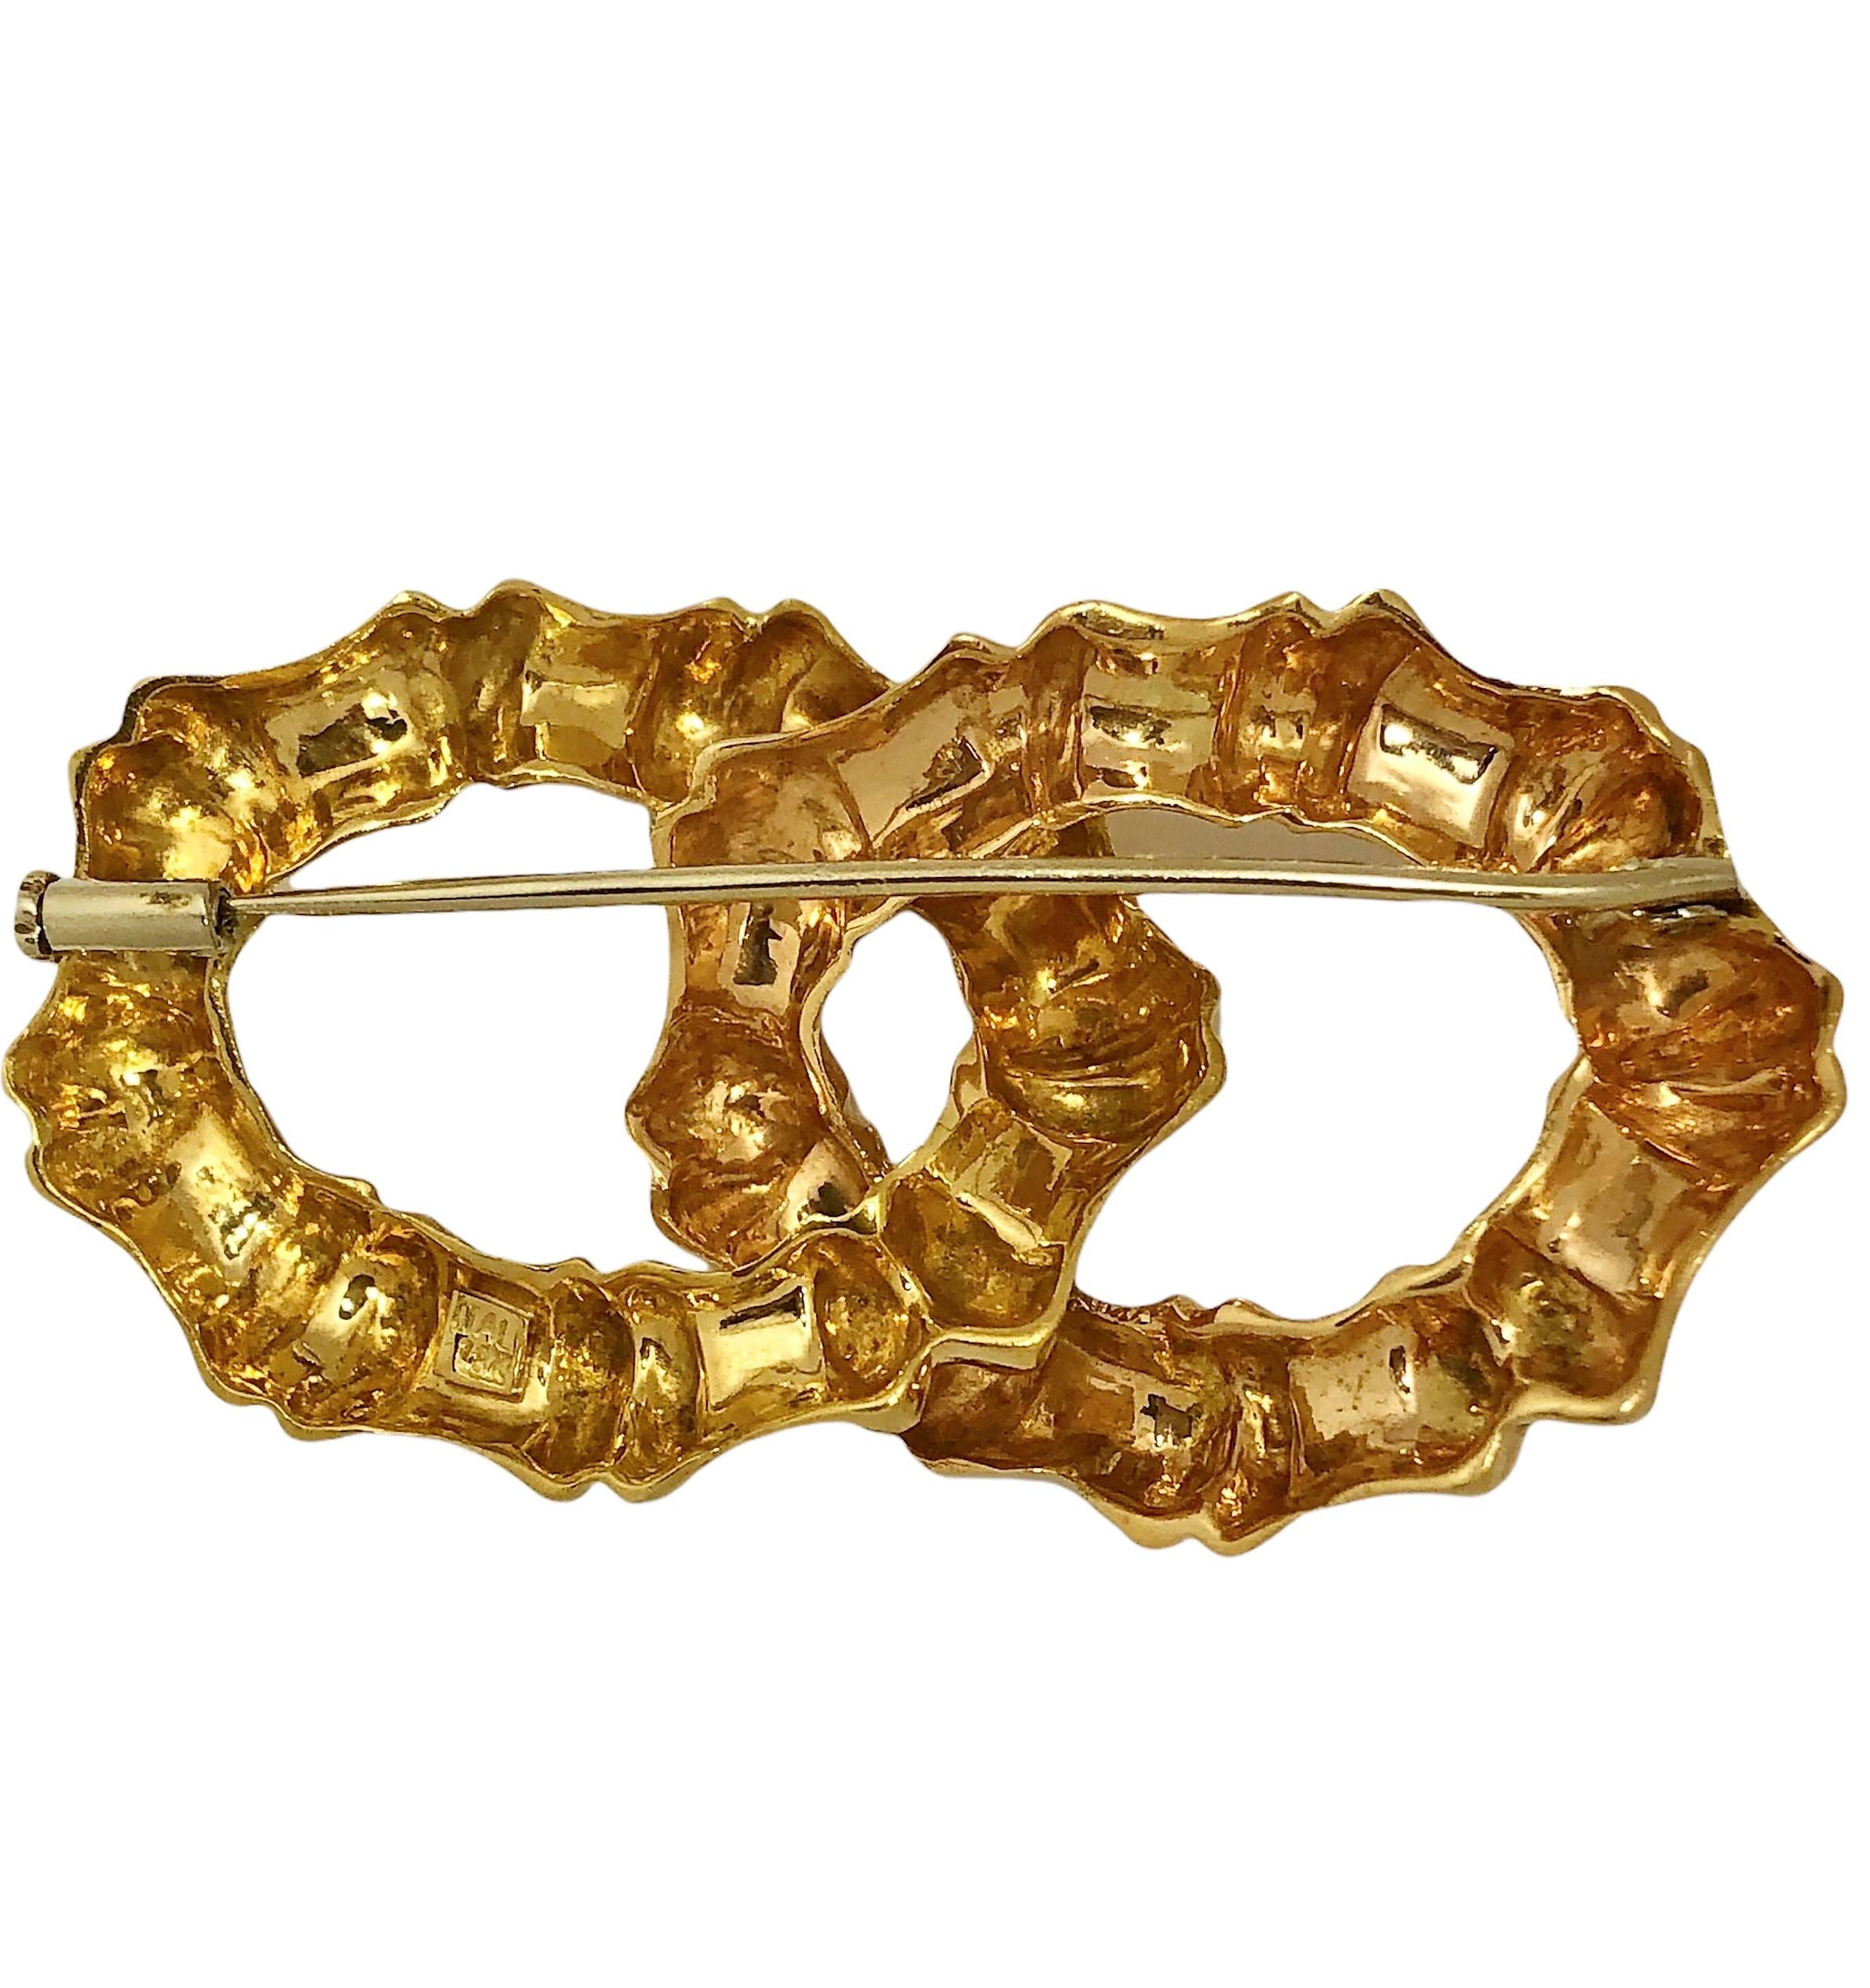 This lovely mid-20th century Italian bamboo link motif brooch consists of two Florentine and high polish finish, intertwined  bamboo links.  It is a very versatile size, measuring 2 1/4 inches in length by 1 1/8 inches in width, and is substantial